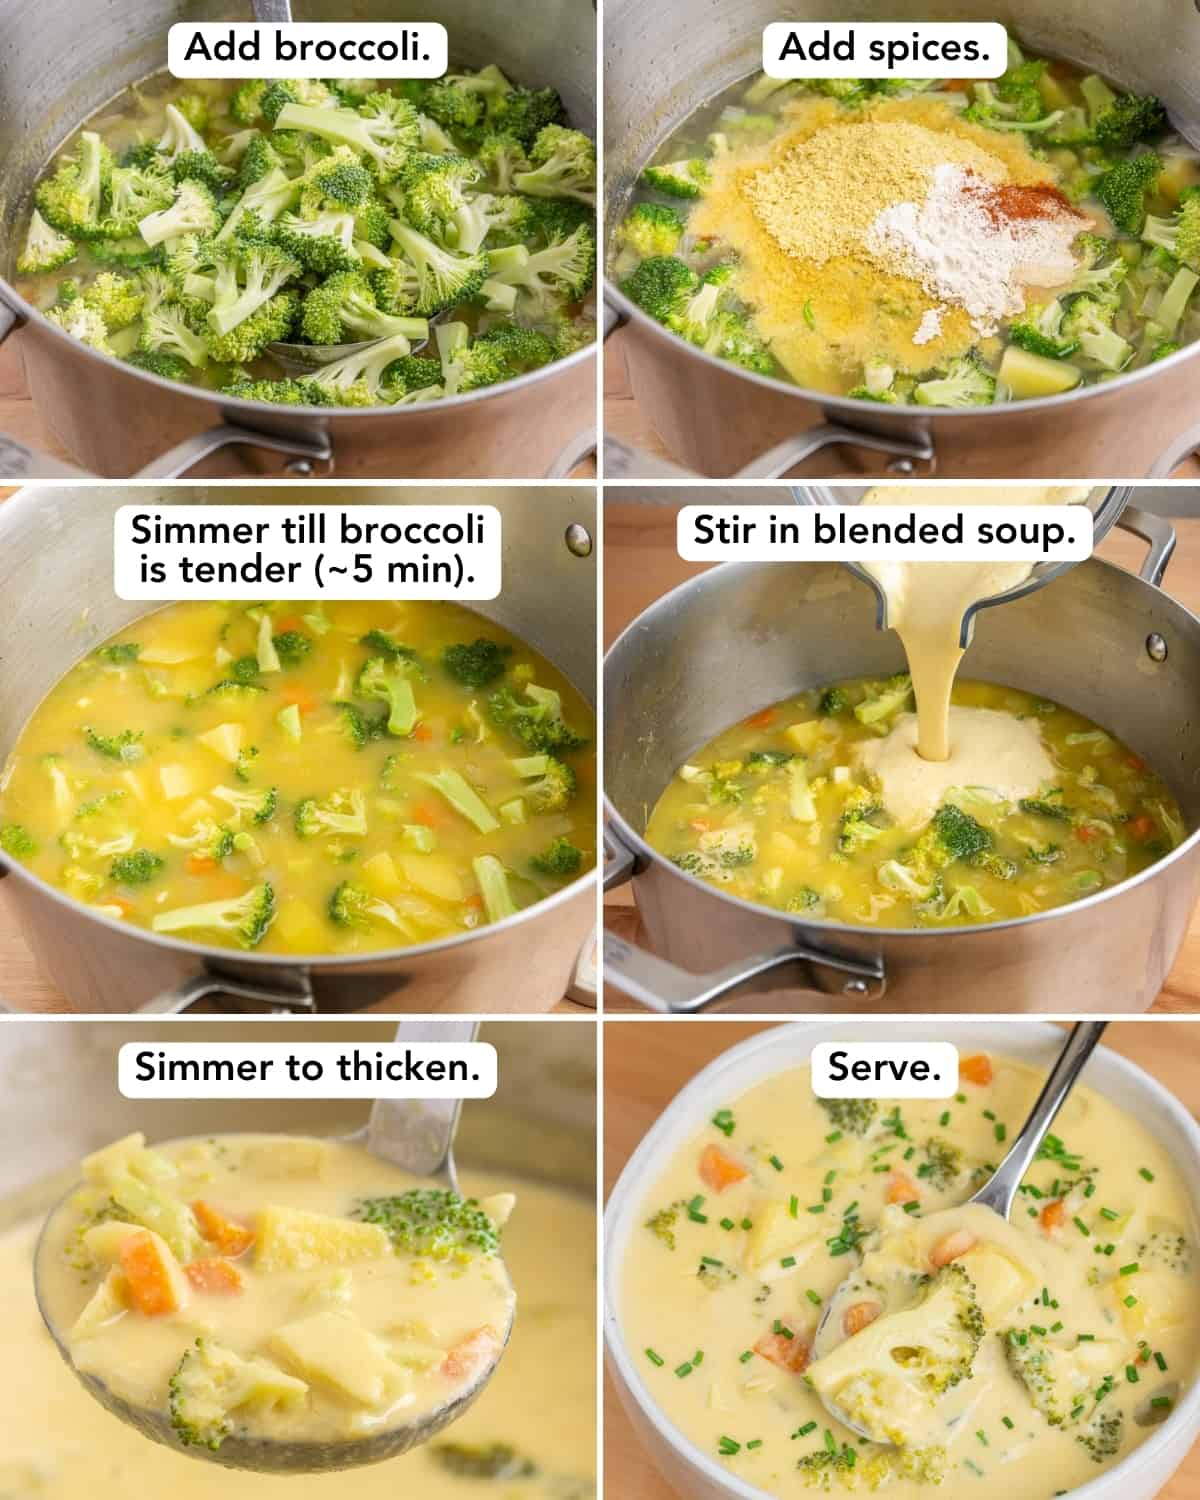 second six steps for making the soup